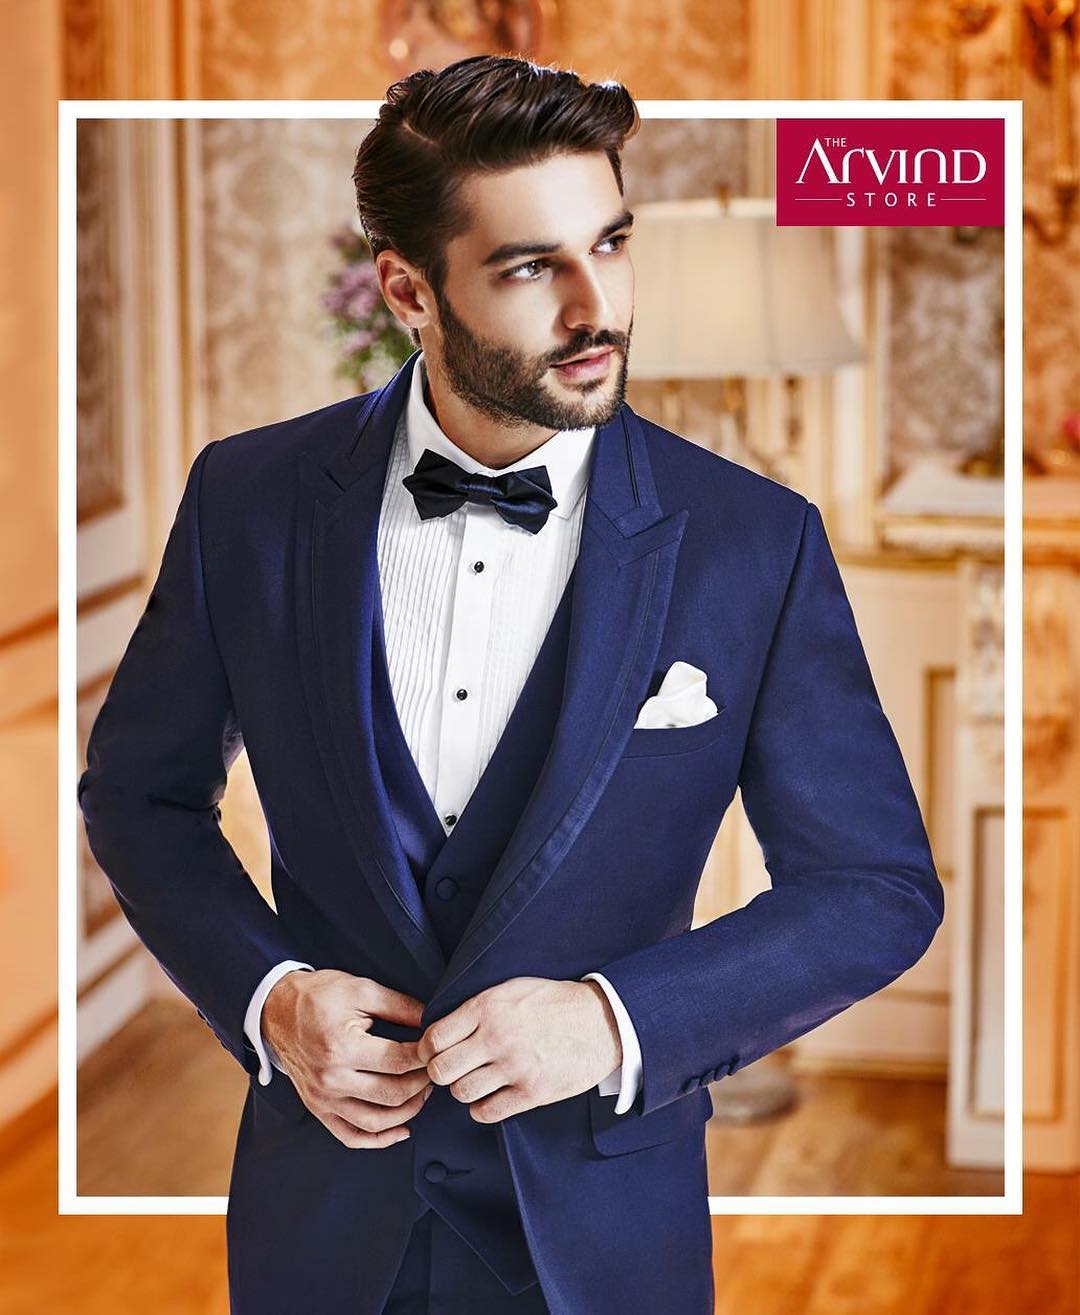 In the season of celebrations, don a contrasting style that looks contemporary, yet classic. Presenting our exclusive Handcrafted Ceremonial collection, visit our stores today - Link in Bio

#celebrationwear #weddingwear #suits #royal #weddingsuits #bestdressed #menswear #handcrafted #groomsuit #designersuits #exclusive